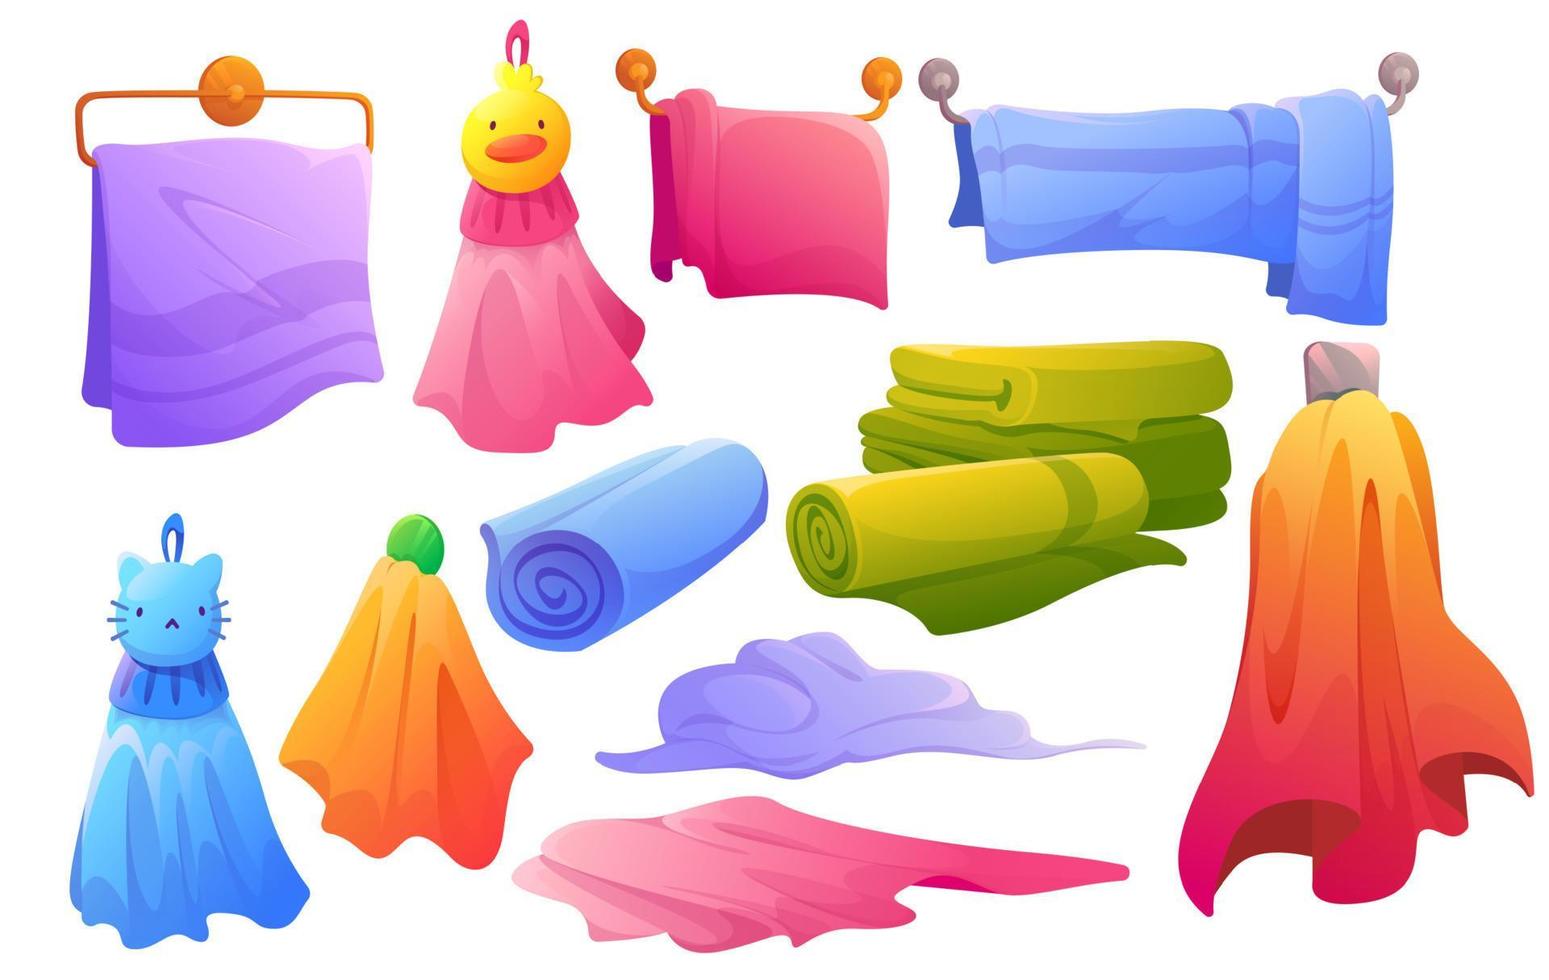 Set of towels hanging, lying, in stack and roll vector